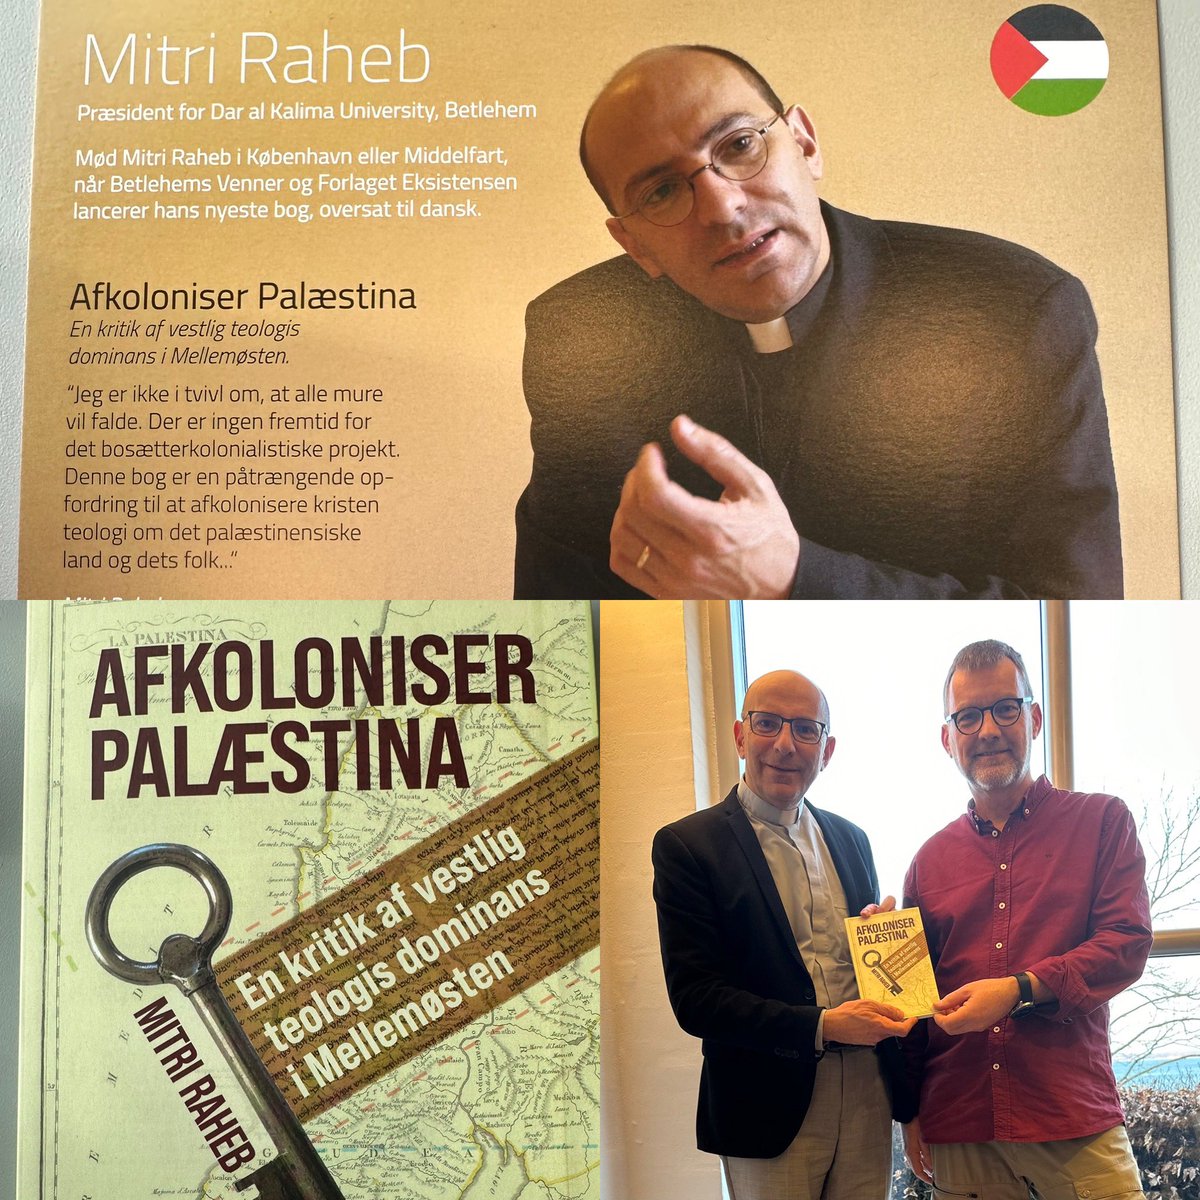 Excited to see my newest book on “Decolonizing Palestine:A critique of western theology!” available now in Danish. Thank you Niels-Peter Lund Jacobsen for working on the translation.